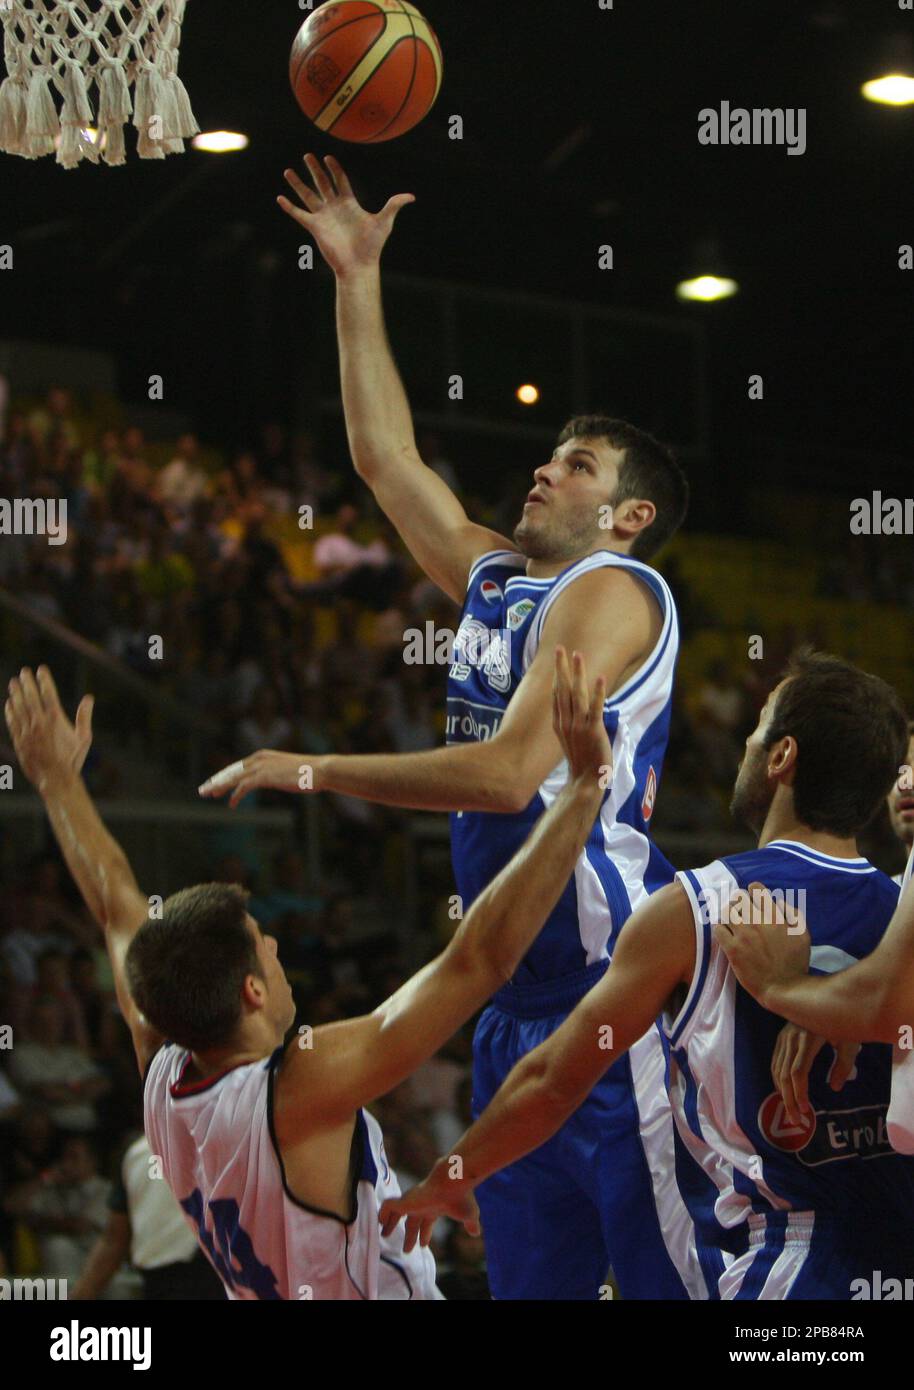 Greece's Fotsis scores during their basketball Eurotournament match against  Serbia Sunday Aug. 12, 2007 in Strasbourg eastern France. (AP  Photo/Christian Lutz Stock Photo - Alamy